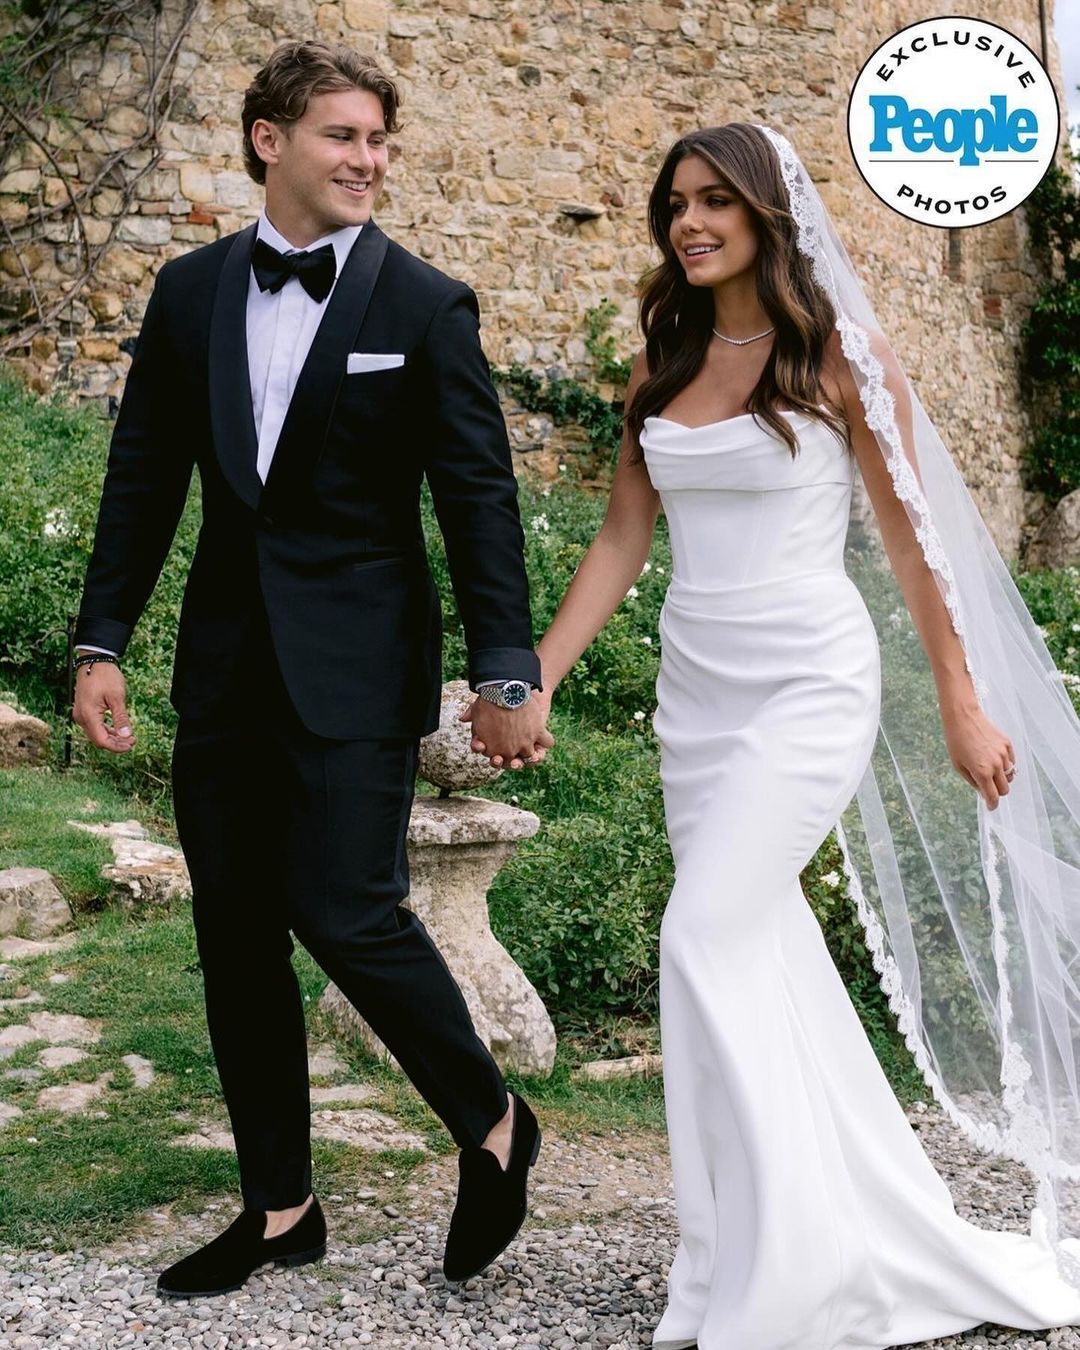 ‘Bachelor’ Alum Hannah Ann Sluss And NFL Player Jake Funk Tie The Knot In Italy